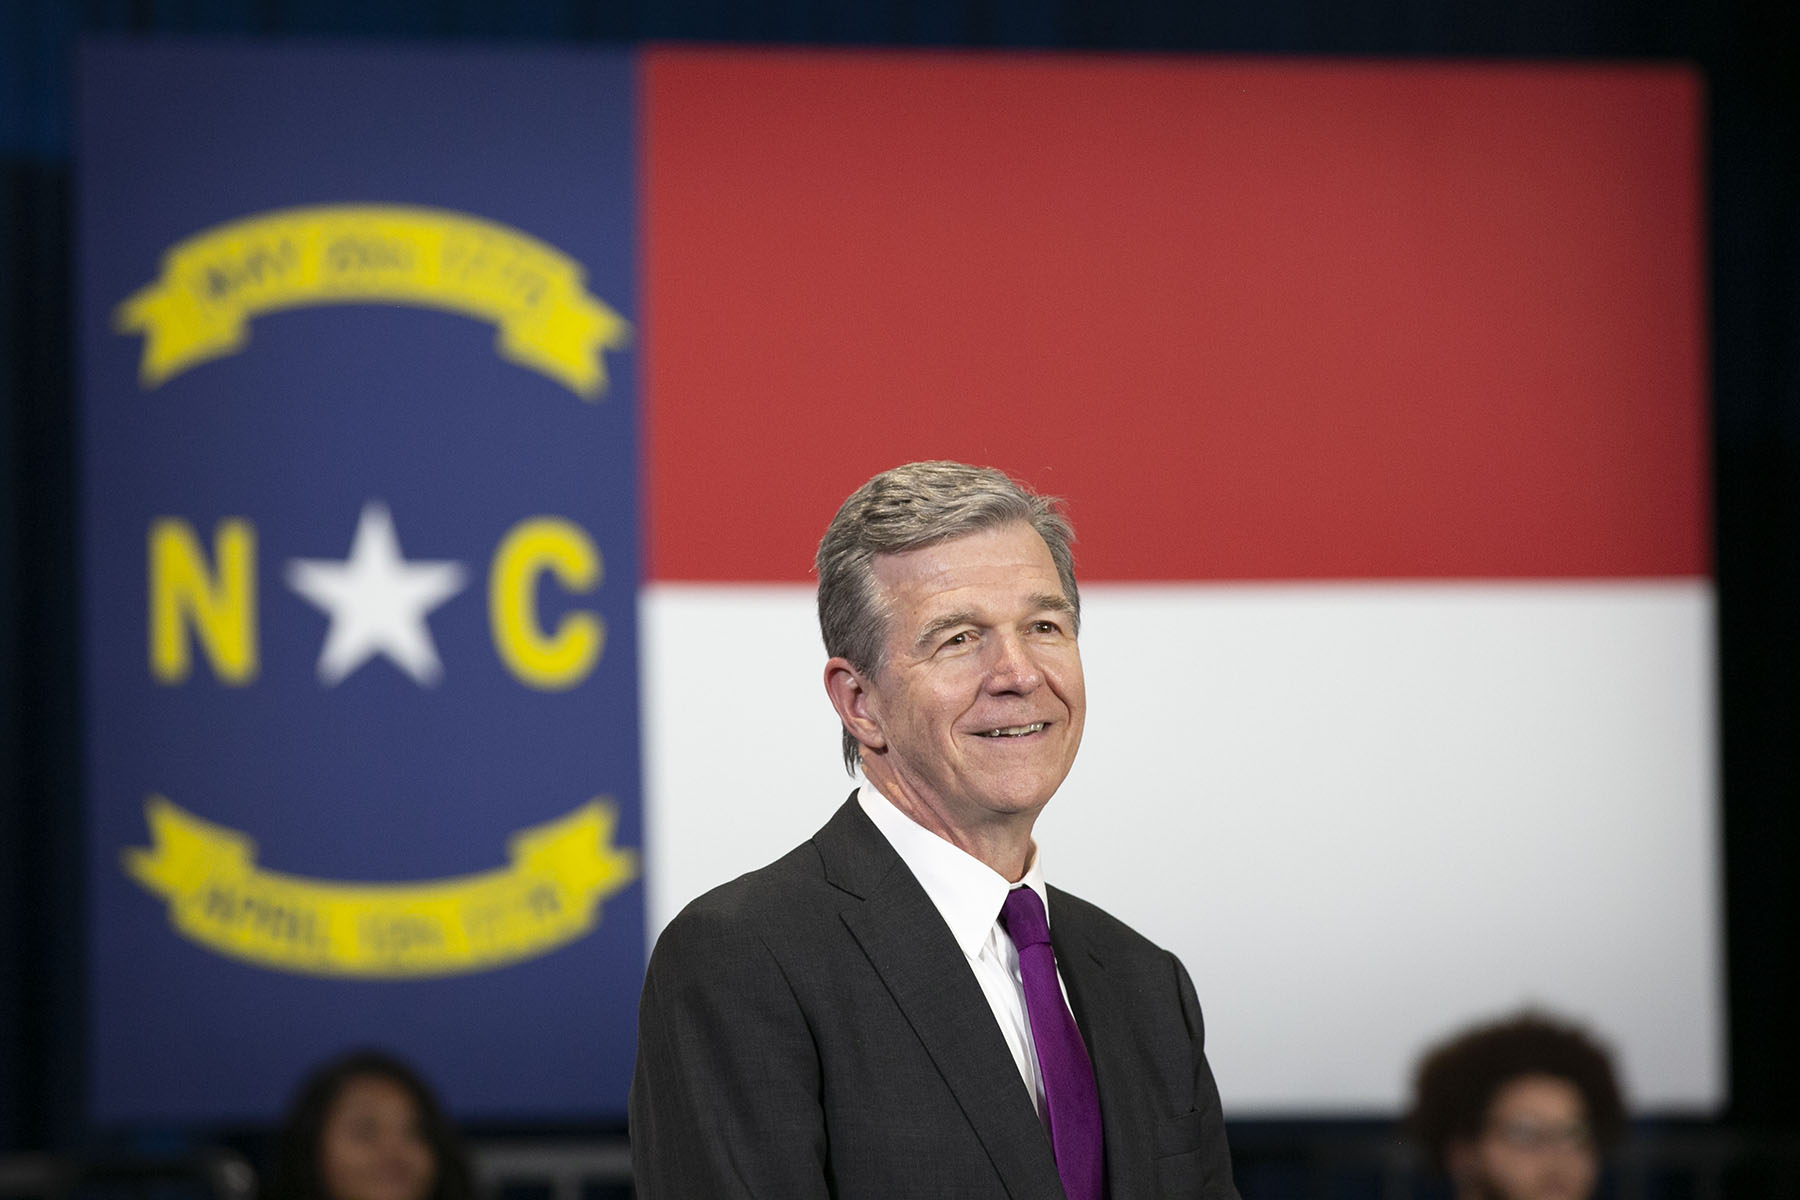 North Carolina Governor Roy Cooper is seen during a visit to Greensboro, North Carolina in April 2022.